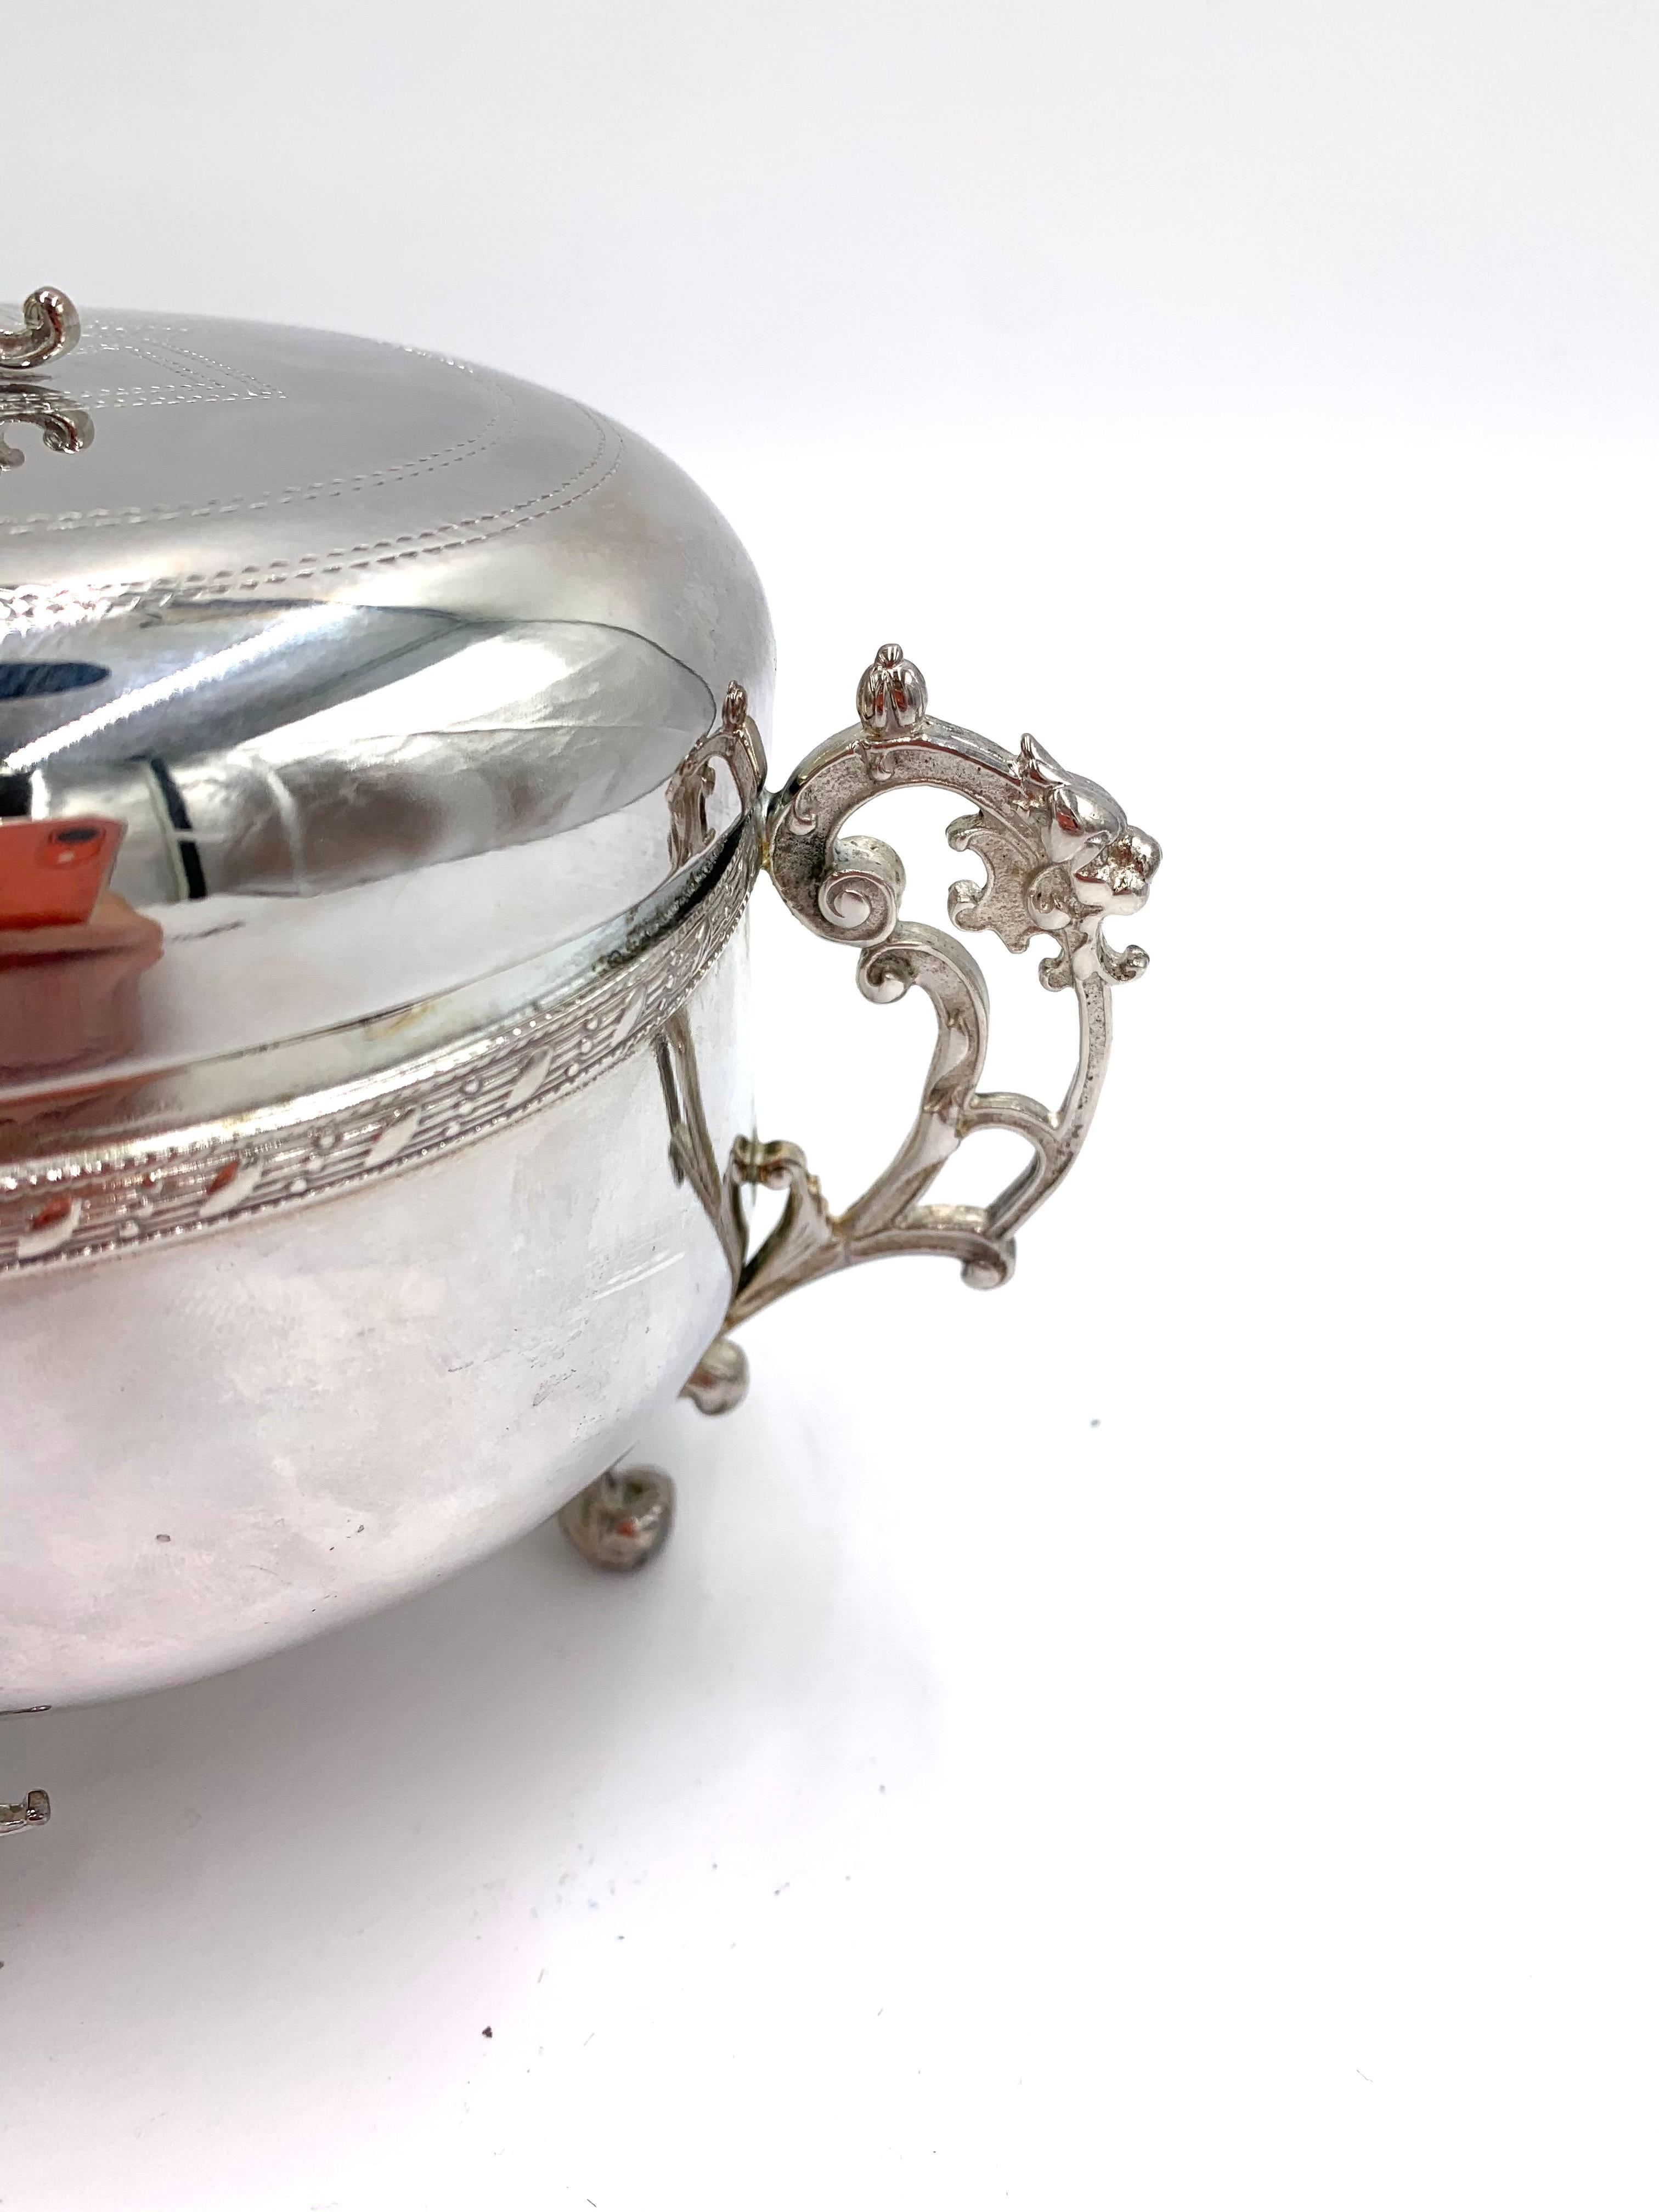 French Silver-Plated Sugar Bowl with a Spoon, Fraget Hefra